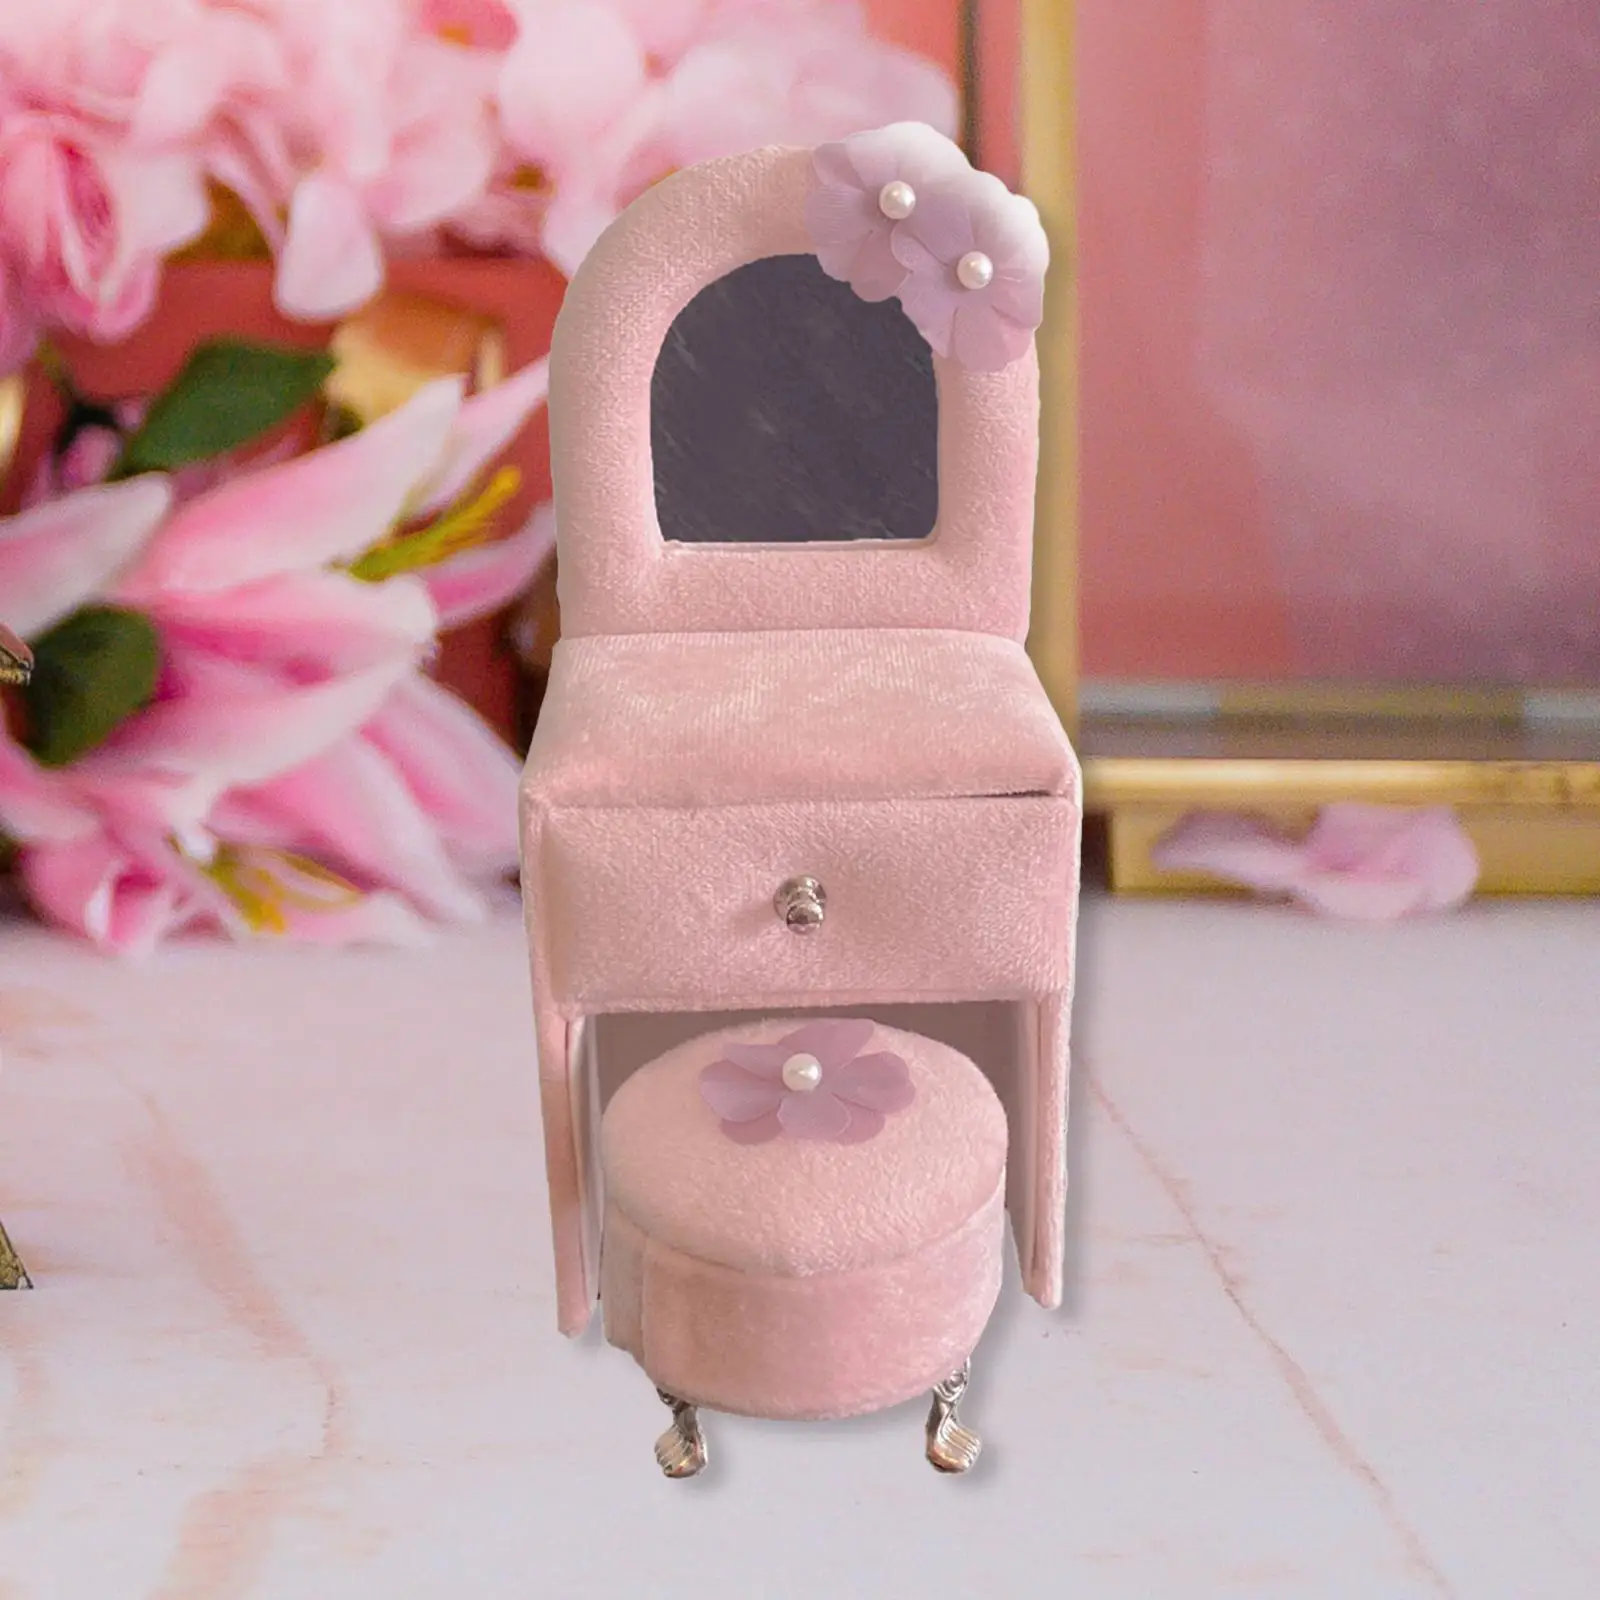 Dollhouse Dressing Table Ornaments Multipurpose Miniature Furniture Jewelry Storage Case Jewelry Box for Kids Girls and Women